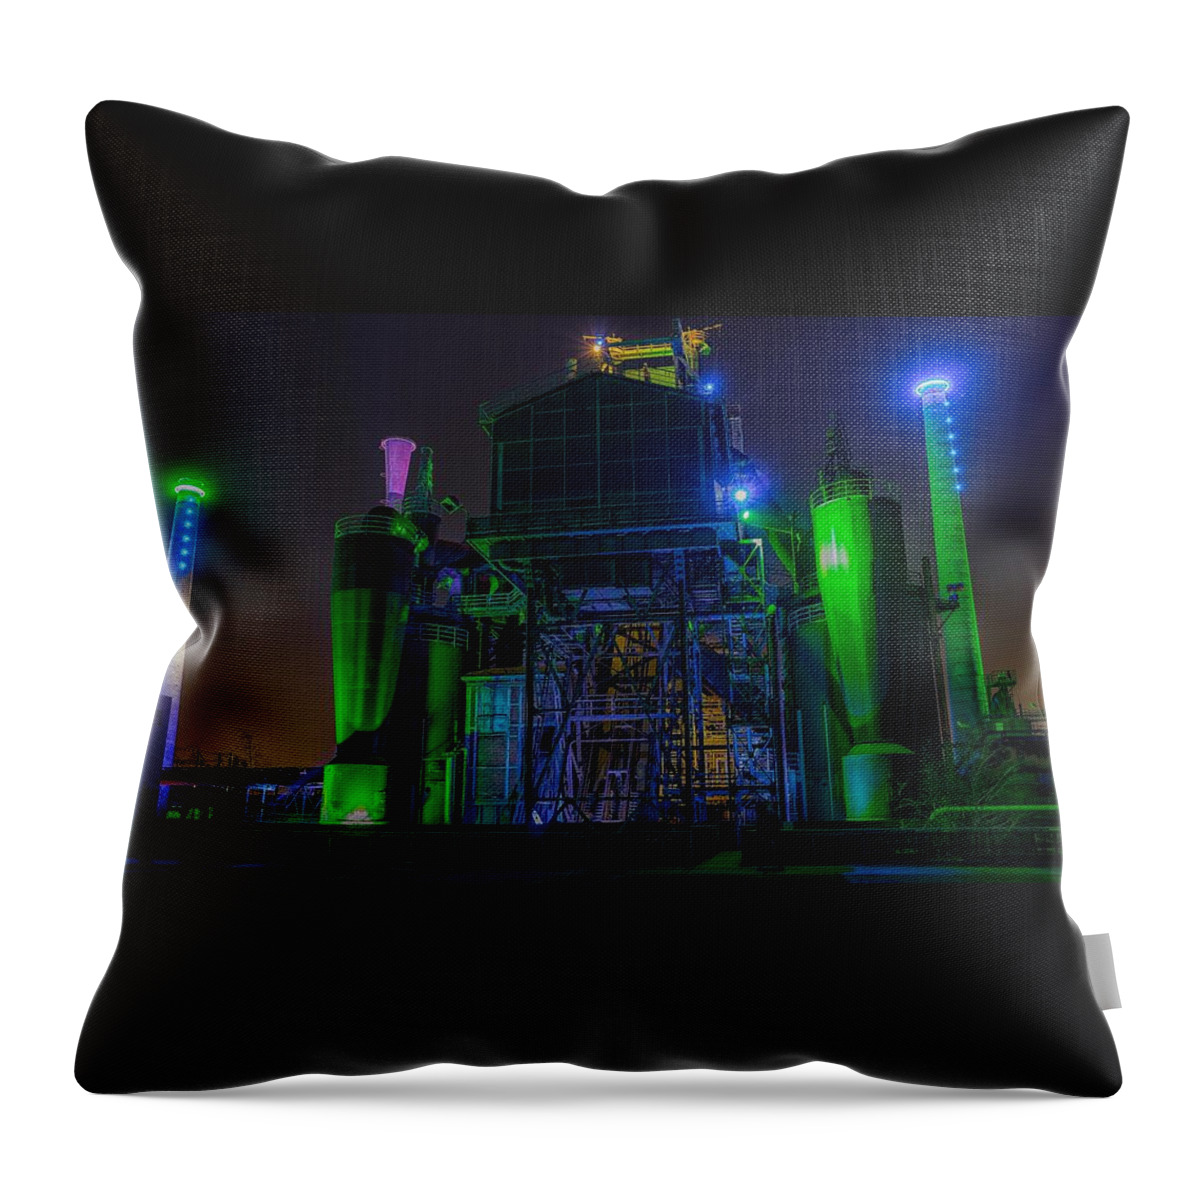 Neon Throw Pillow featuring the photograph Neon Color Machinery by Billy Soden